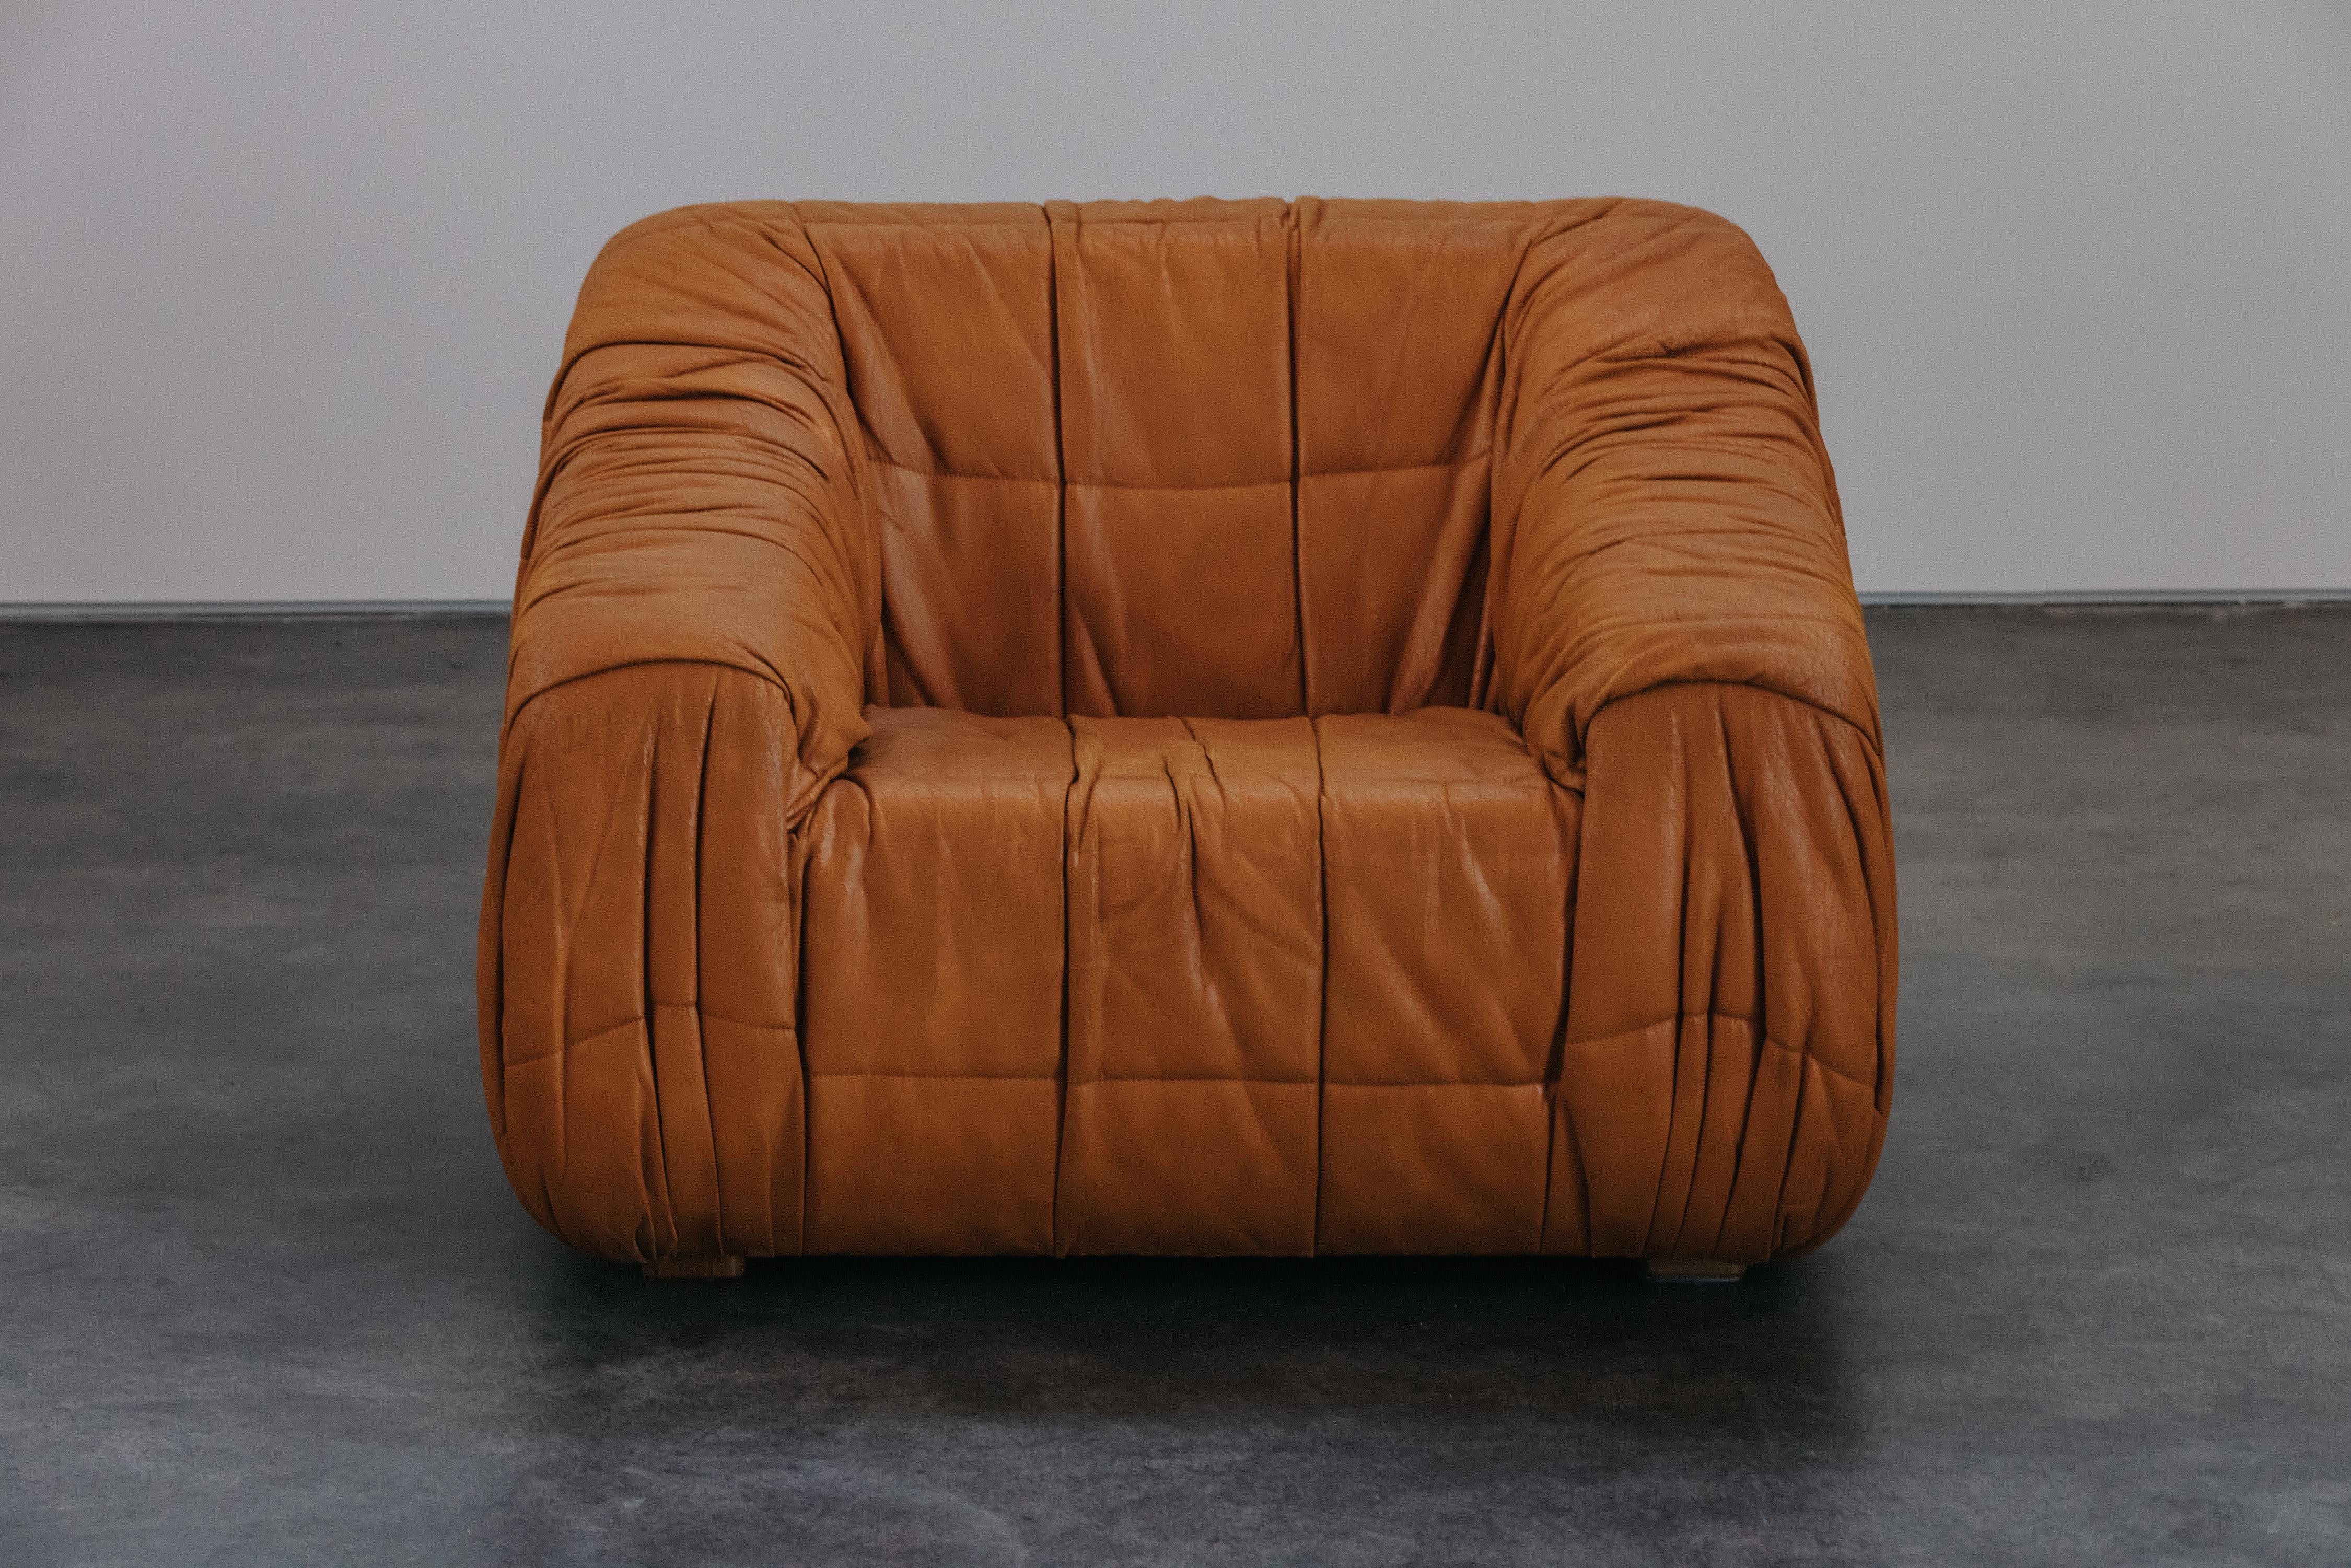 Vintage Piumino Chair by De Pas, D'urbino & Lomazzi, Italy, 1970s.  Original cognac leather upholster with nice patina and use.